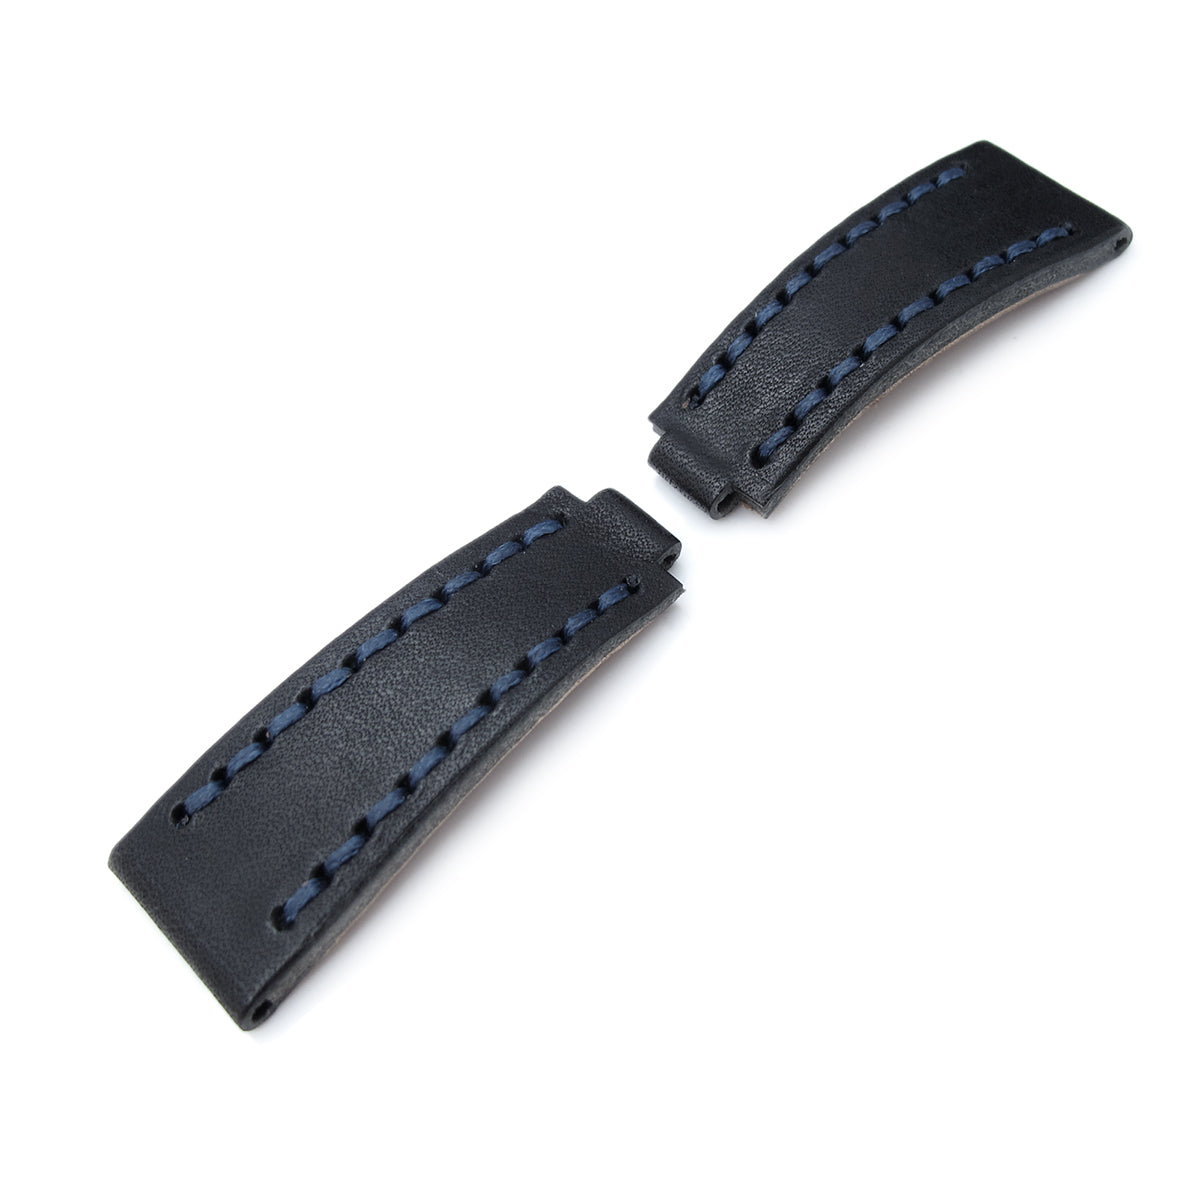 20mm MiLTAT RX Collection Watch Strap NERO Black Genuine Calf Navy Blue St. Tailor-made for RX SUB & EXP Strapcode Watch Bands